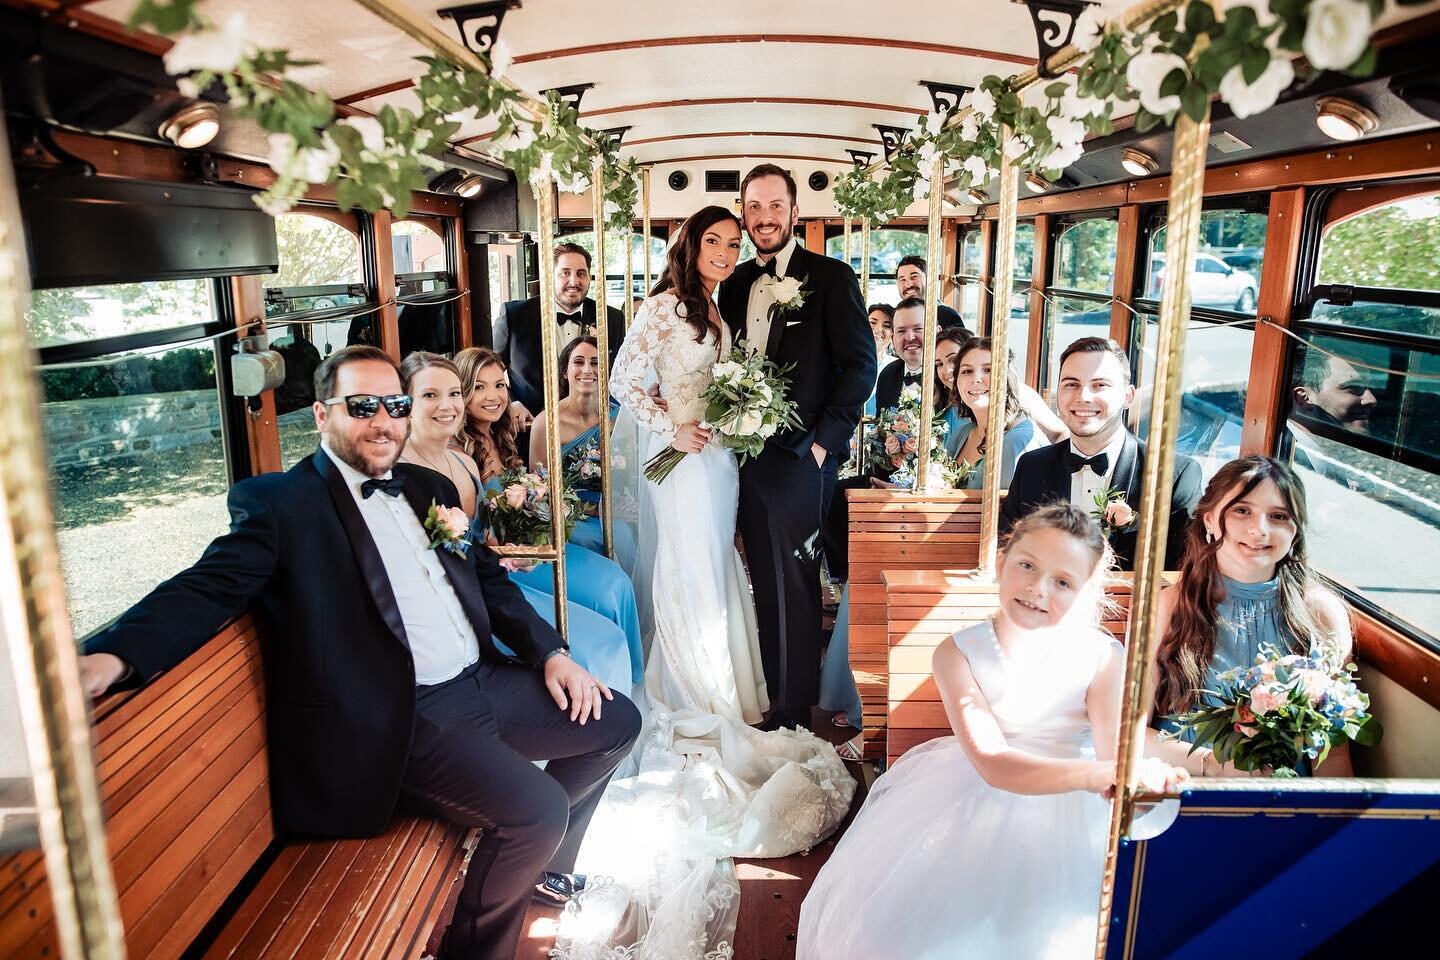 When you book with us, you&rsquo;re not only booking transportation, you&rsquo;re booking stylish wedding pictures of your big day! Make sure to corral your wedding party too for some cool shots! 😍🚃
. 
. 
#pabride #buckscounty #montcopa #paweddingi